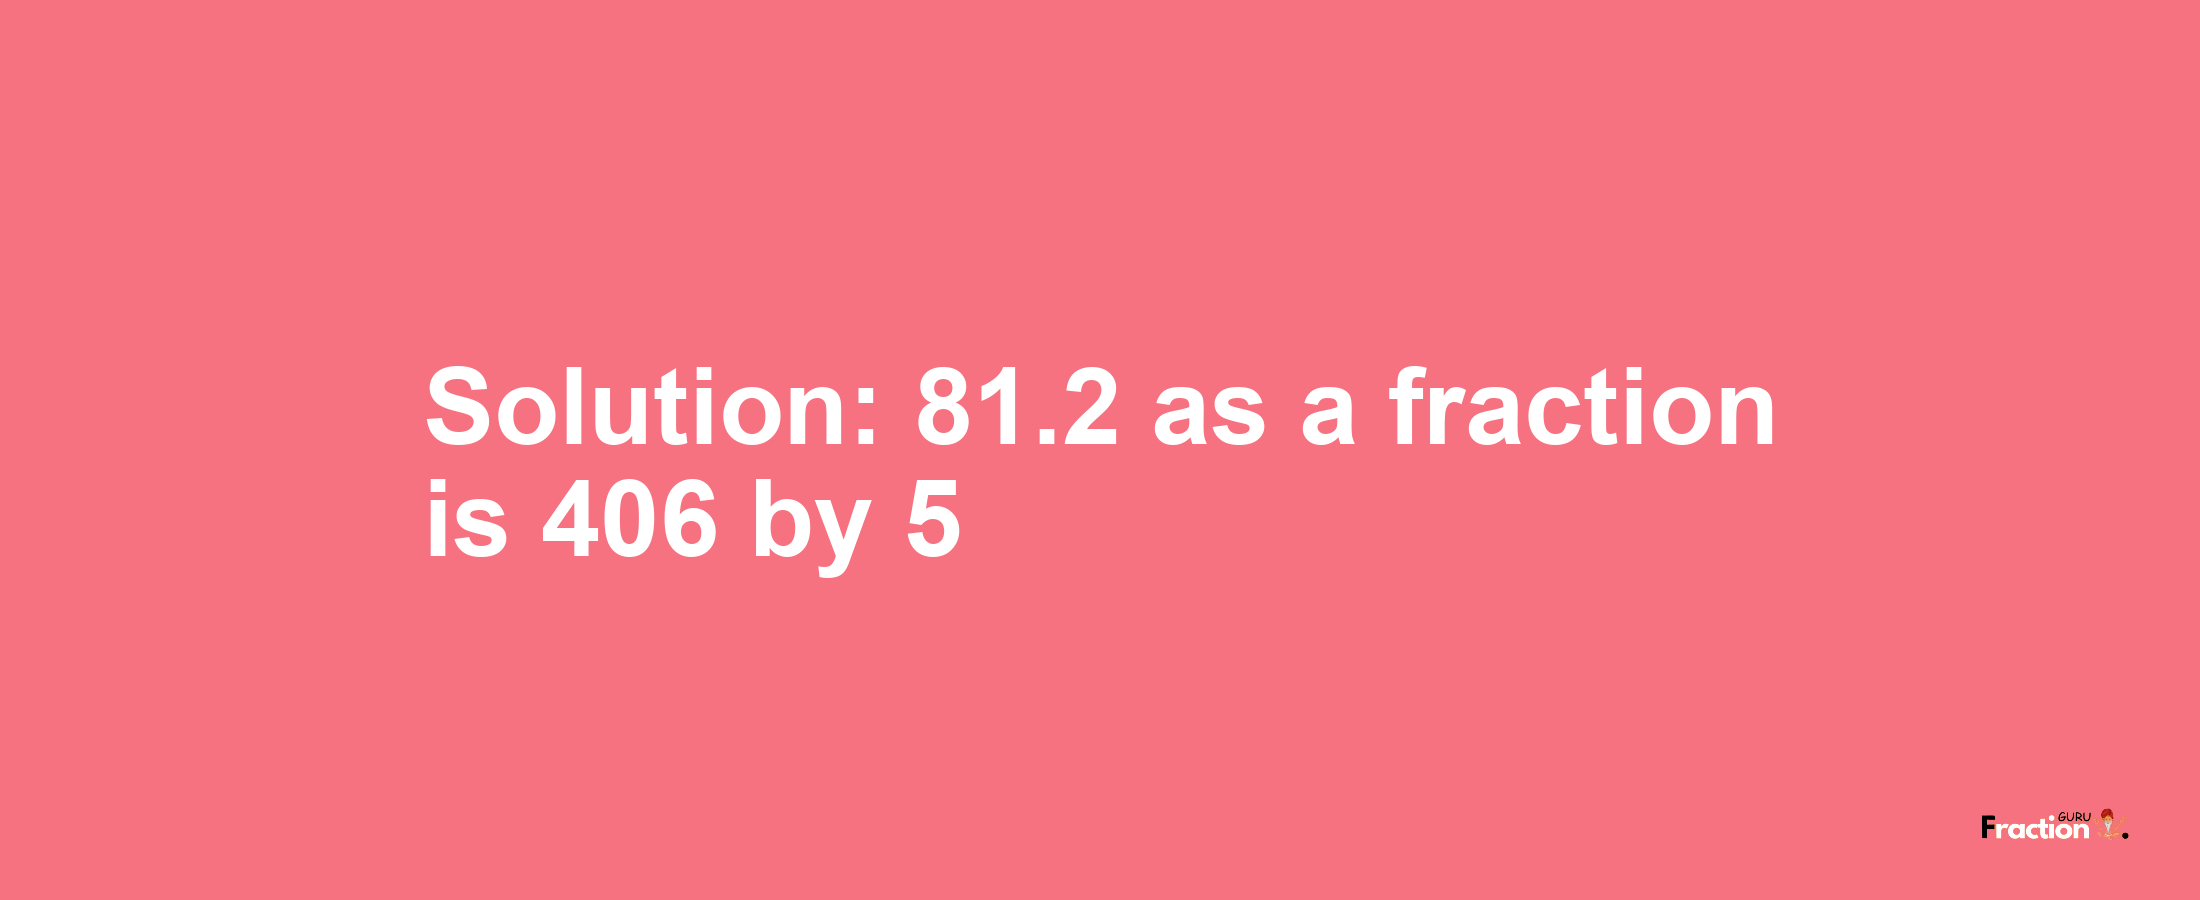 Solution:81.2 as a fraction is 406/5